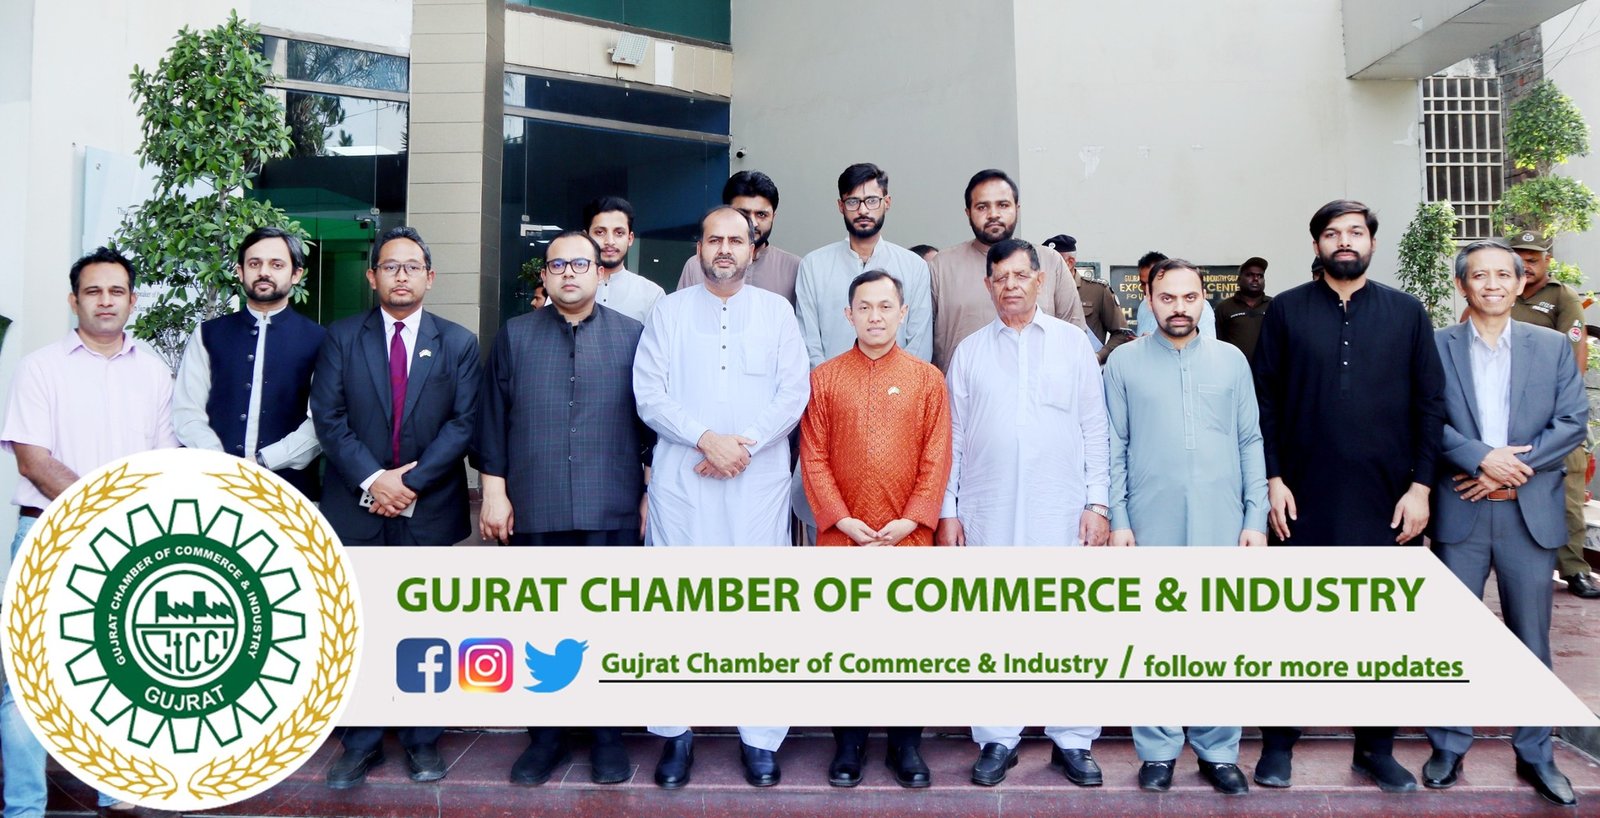 H.E. Mr. Rahmat Hindiarta Kusuma, Chargé d'Affaires at the #Indonesian Embassy in #Pakistan, along with Mr. Ferry J. Murdiansyah, Head of Chancery and Coordinator of Political Affairs, and Mr. M. Sufyan, Member of Political Affairs, visited Gujrat Chamber of Commerce & Industry (GtCCI) and had a meeting with the business community of #Gujrat.